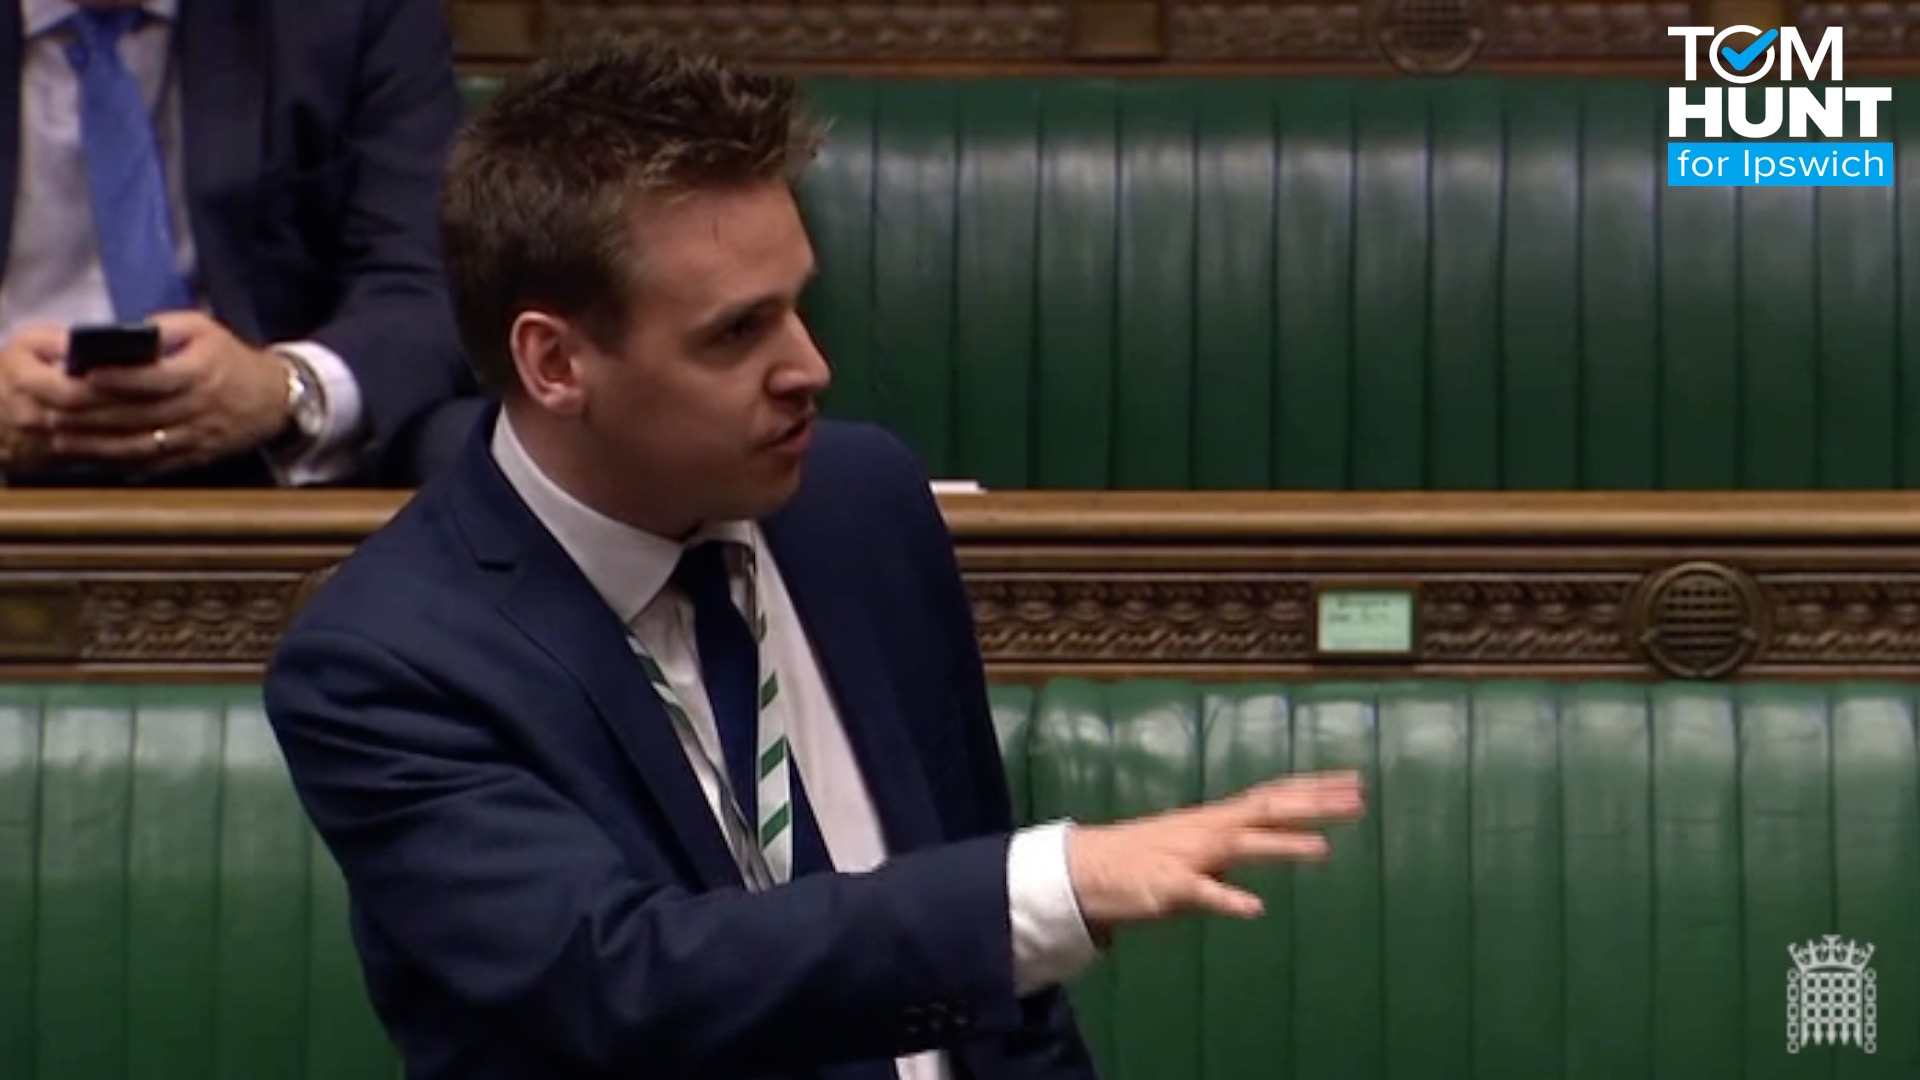 On Thursday I made my third speech in Parliament in the “Global Britain debate”. I stressed the importance of increased trading potential for Ipswich bearing in mind it’s close proximity to the Port of Felixstowe and the Port of Ipswich. Overall around 6,000 of my constituents are employed at one of the two Ports.